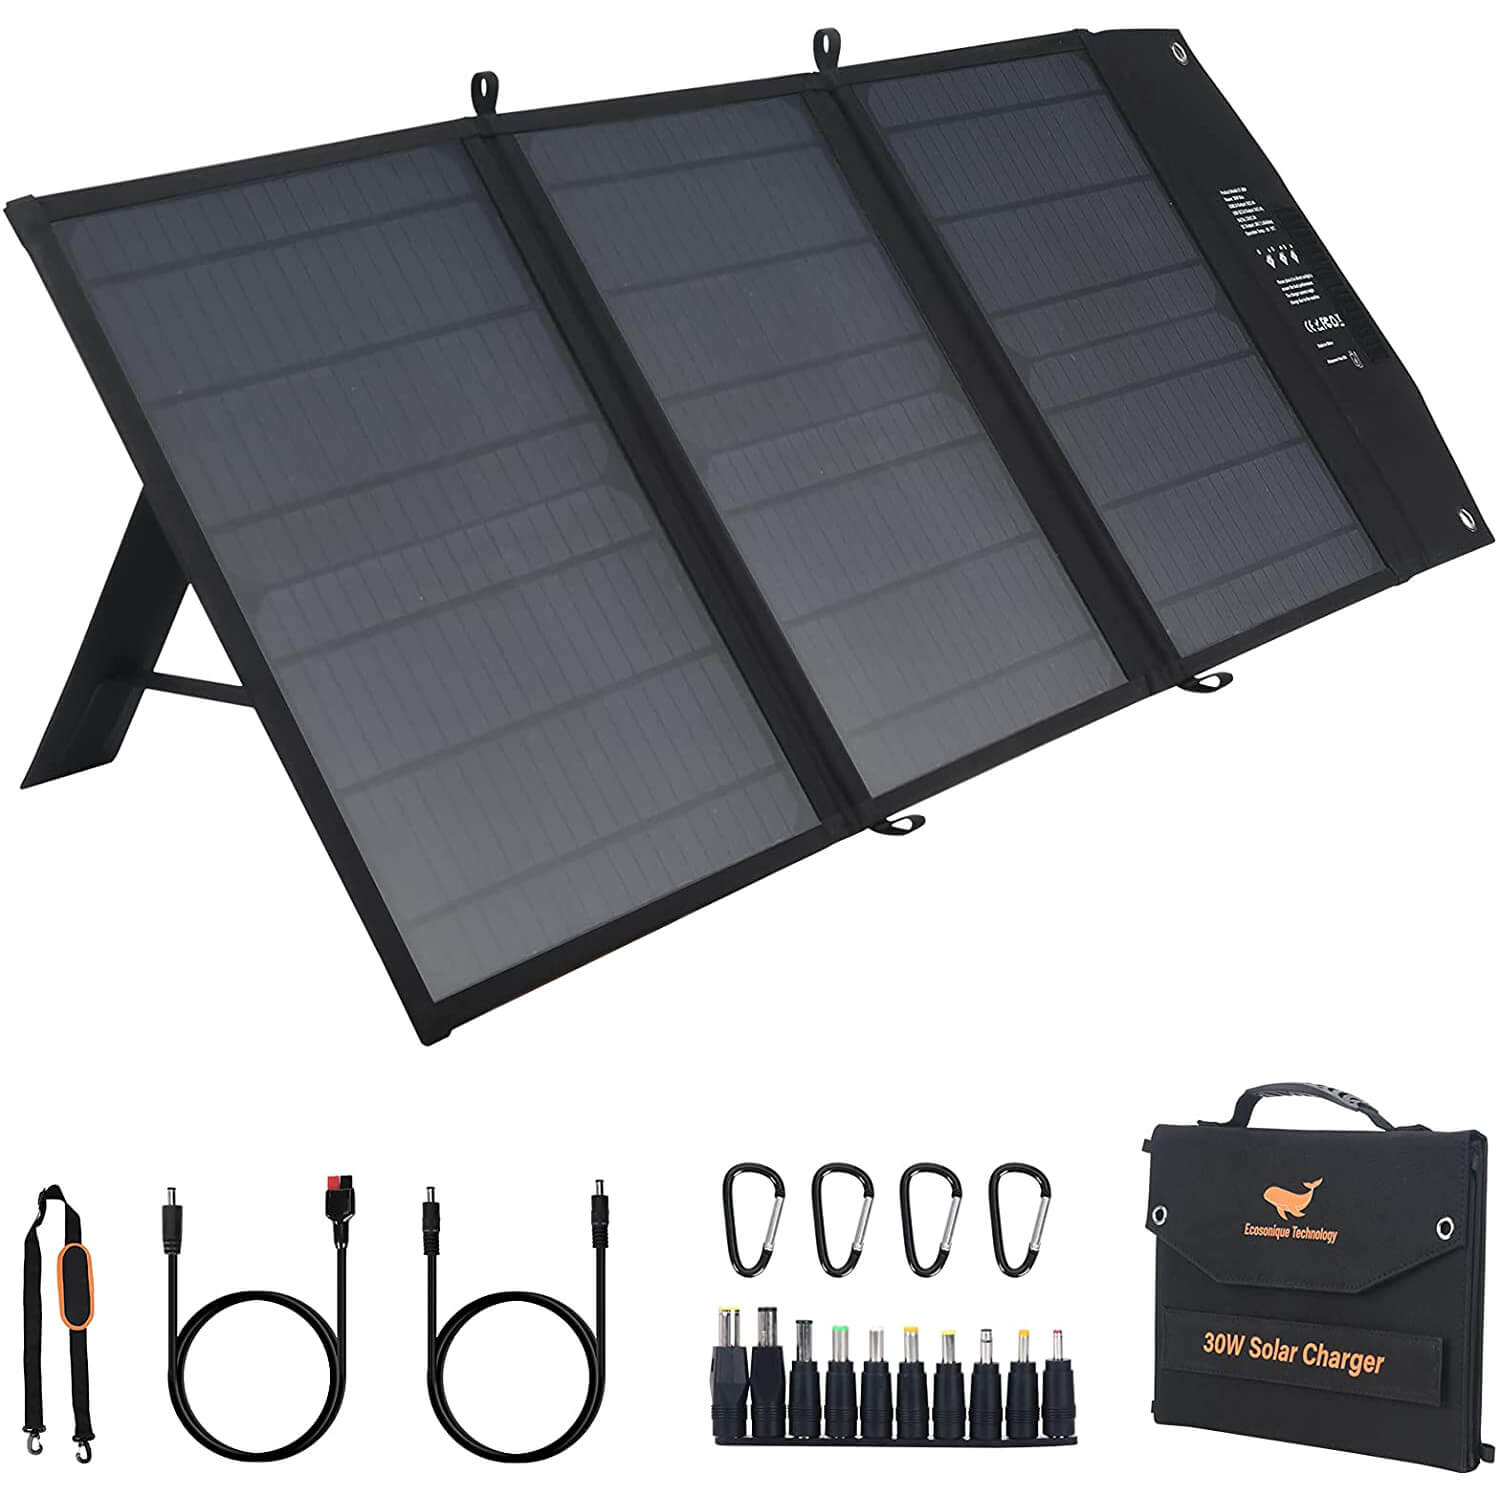 30W Portable Solar Panel 10 Connector IPX4 Waterproof Monocrystalline Solar Panel Charger for Phone Powerbank Camping Hiking Ecosonique Foldable Solar Charger with QC 3.0 USB Port & 18V DC Output 